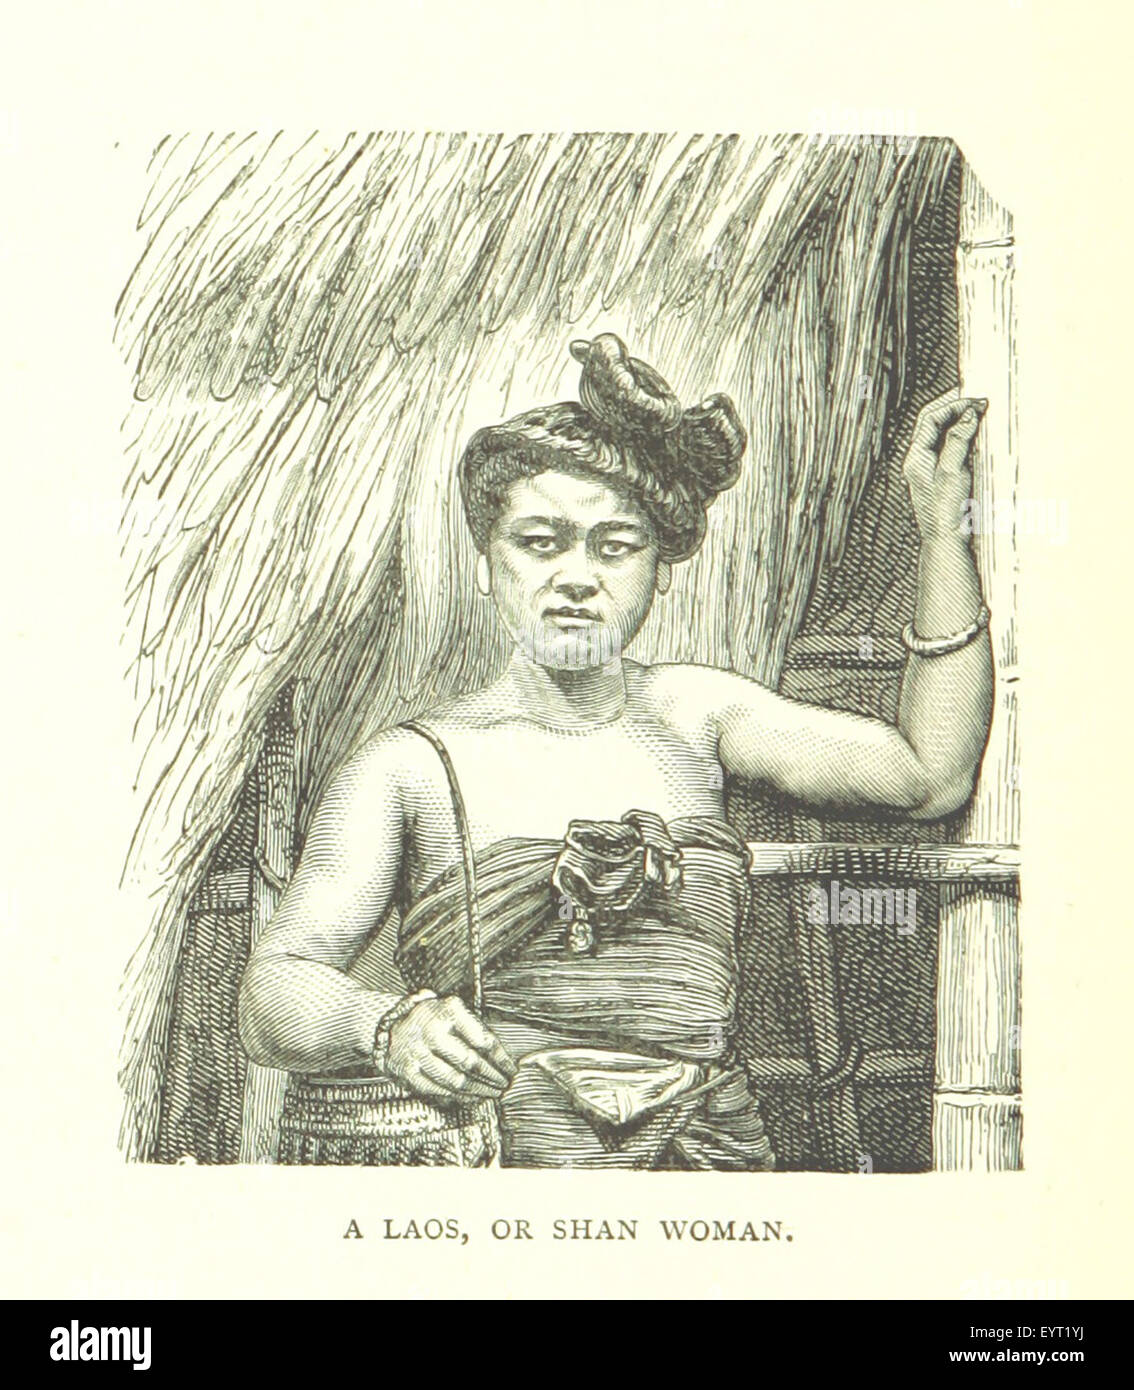 Image taken from page 240 of 'Amongst the Shans ... With ... illustrations, and an historical sketch of the Shans by Holt S. Hallett ... Preceded by an introduction on the cradle of the Shan race by Terrien de Lacouperie' Image taken from page 240 of 'Amongst the Shans Stock Photo